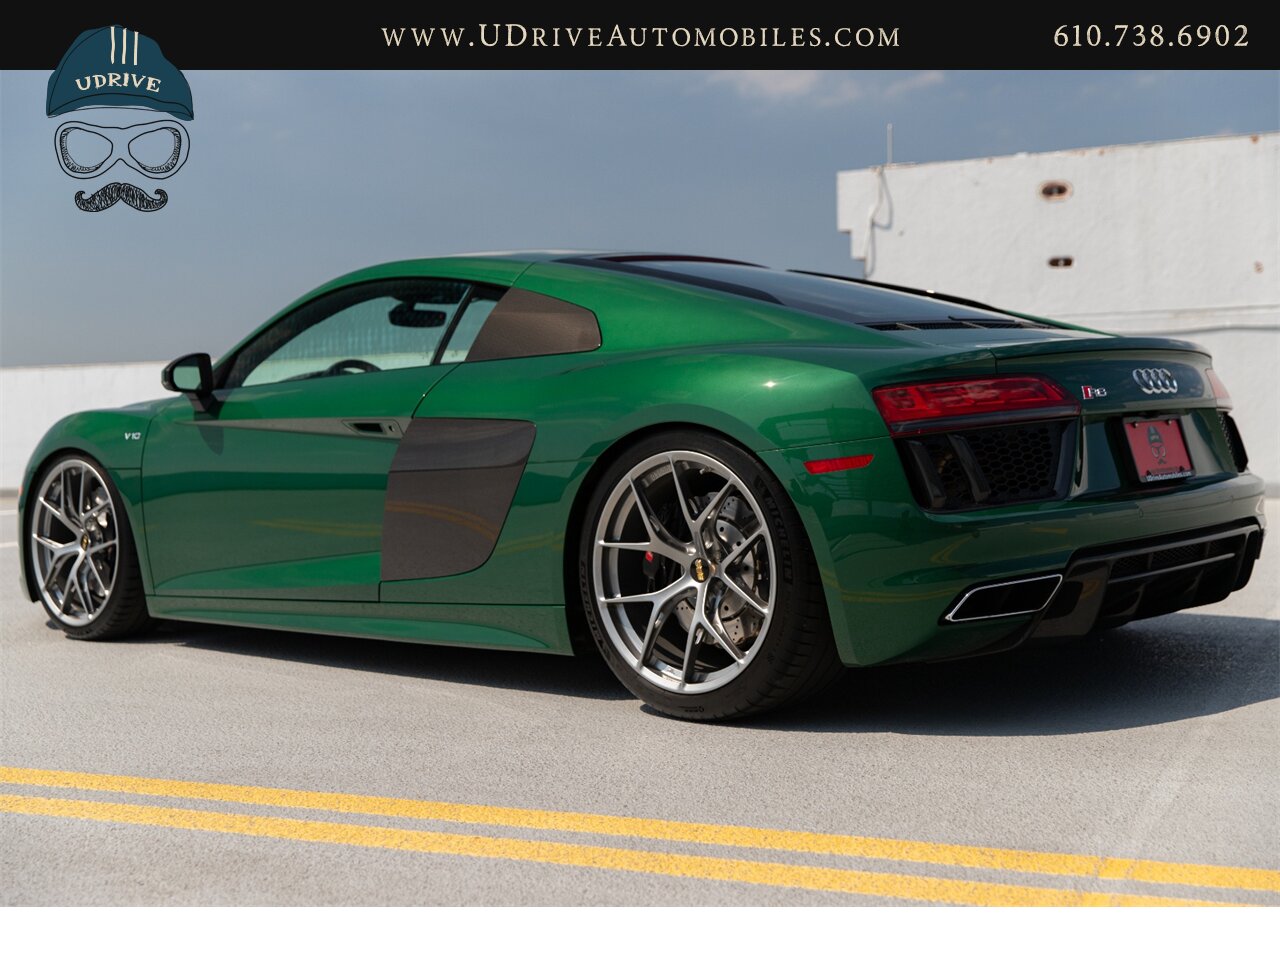 2017 Audi R8 Audi Exclusive Avocado Green Vermont Brown Leather  Diamond Stitching V10 Carbon Fiber - Photo 26 - West Chester, PA 19382